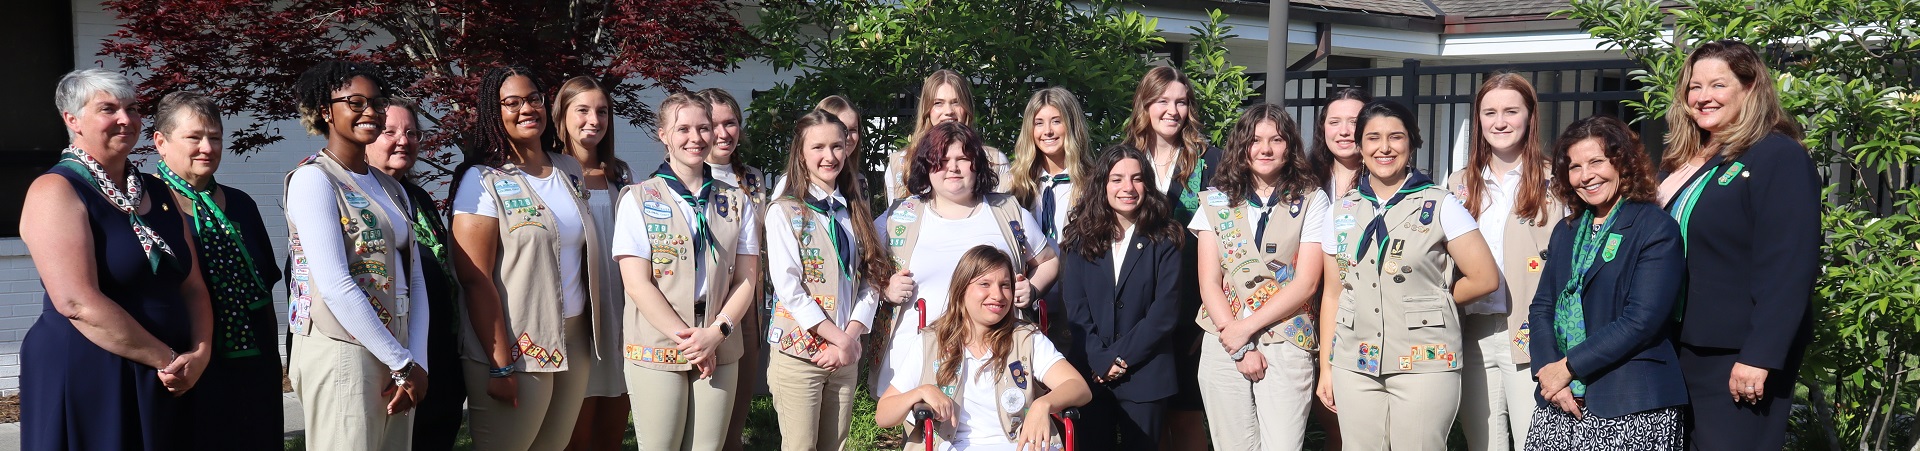  Gold Award Girl Scouts with GSCCC Gold Award Committee members at awards event  